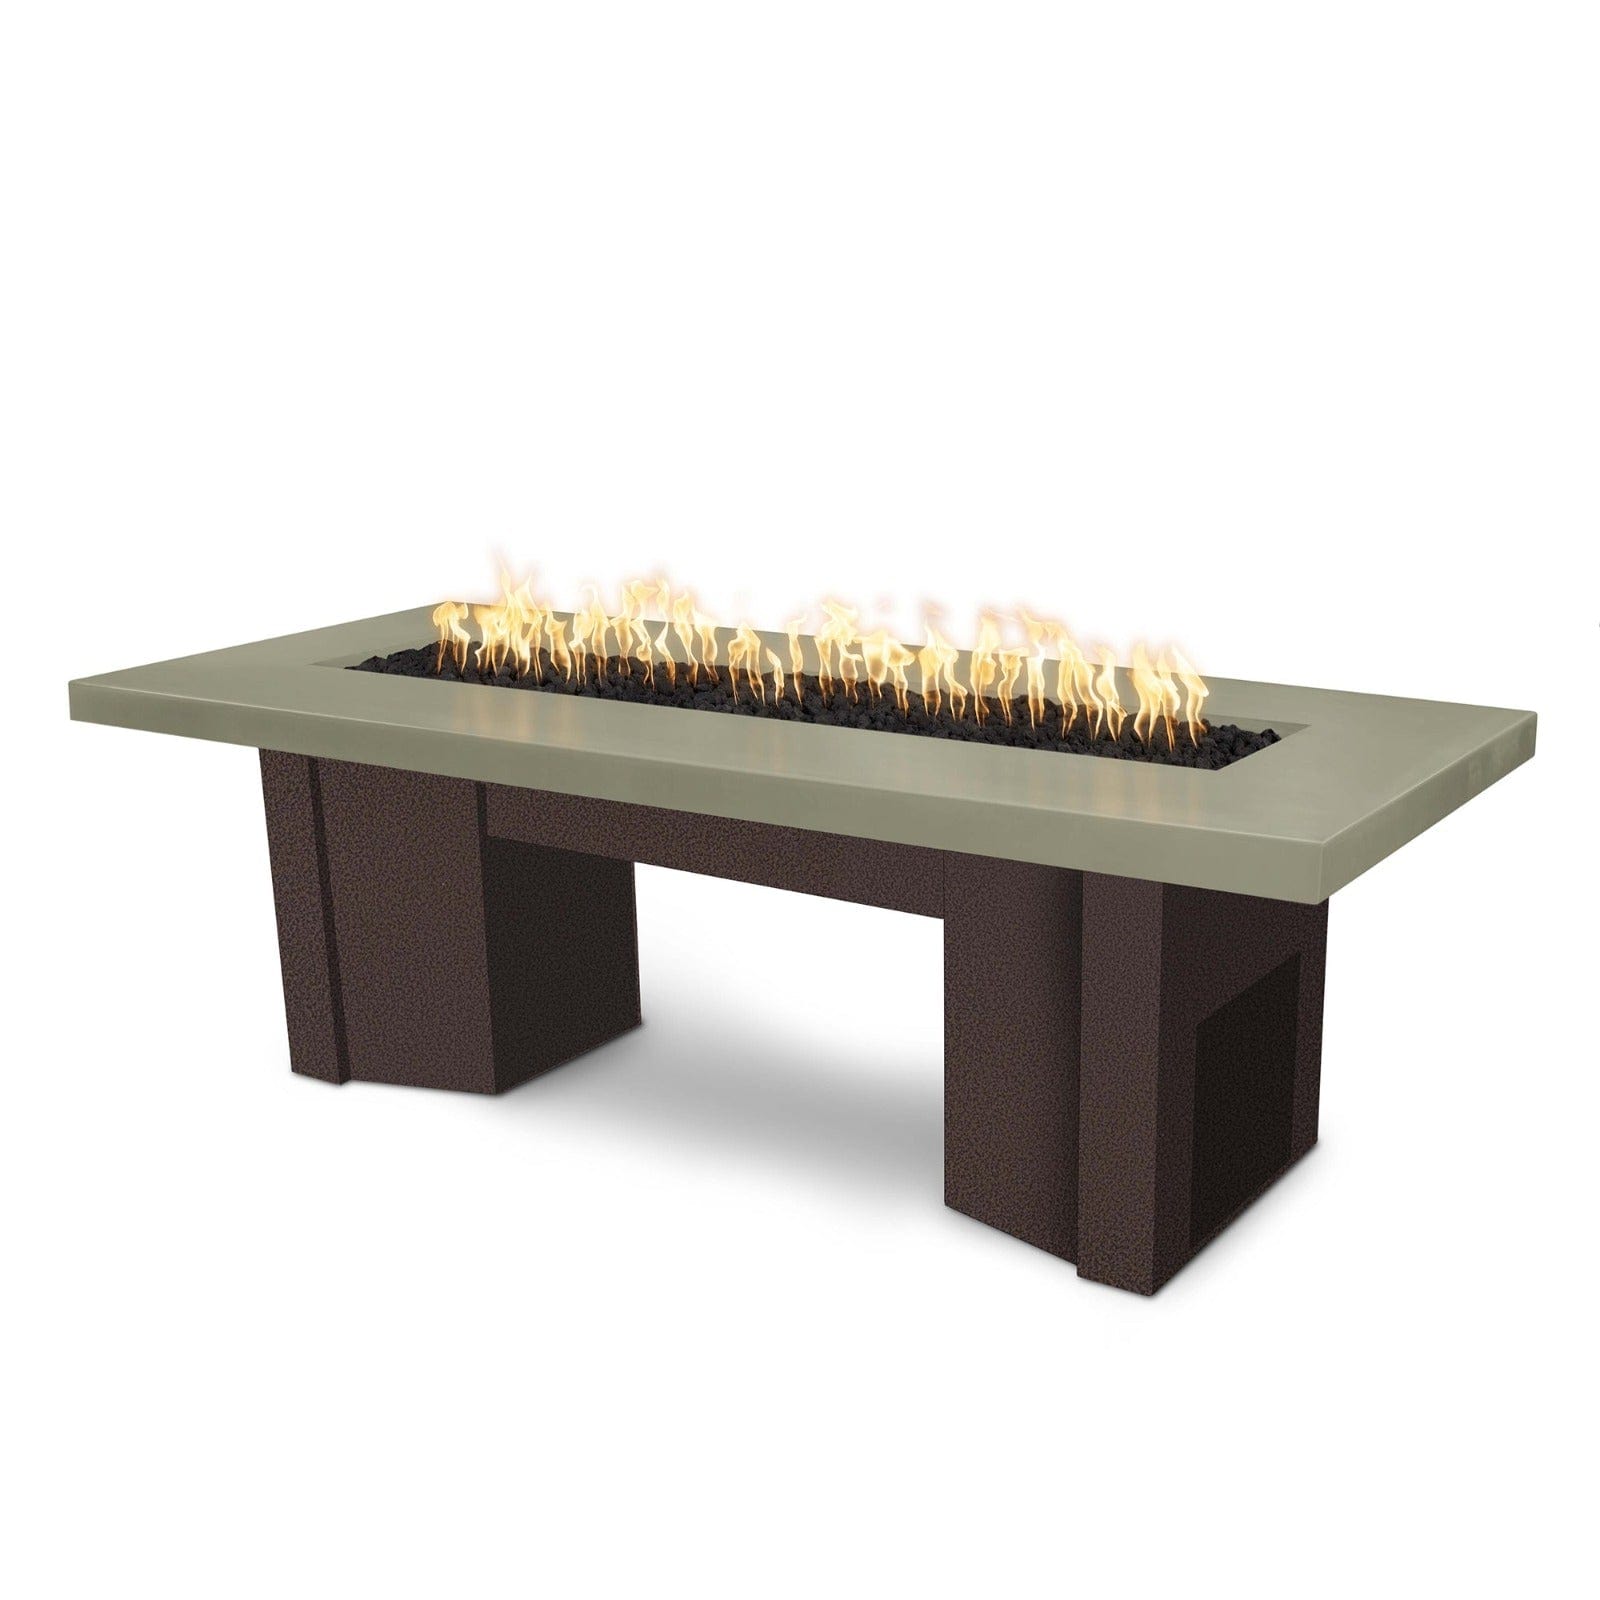 The Outdoor Plus Fire Features Ash (-ASH) / Copper Vein Powder Coated Steel (-CPV) The Outdoor Plus 78" Alameda Fire Table Smooth Concrete in Natural Gas - Match Lit / OPT-ALMGFRC78-NG